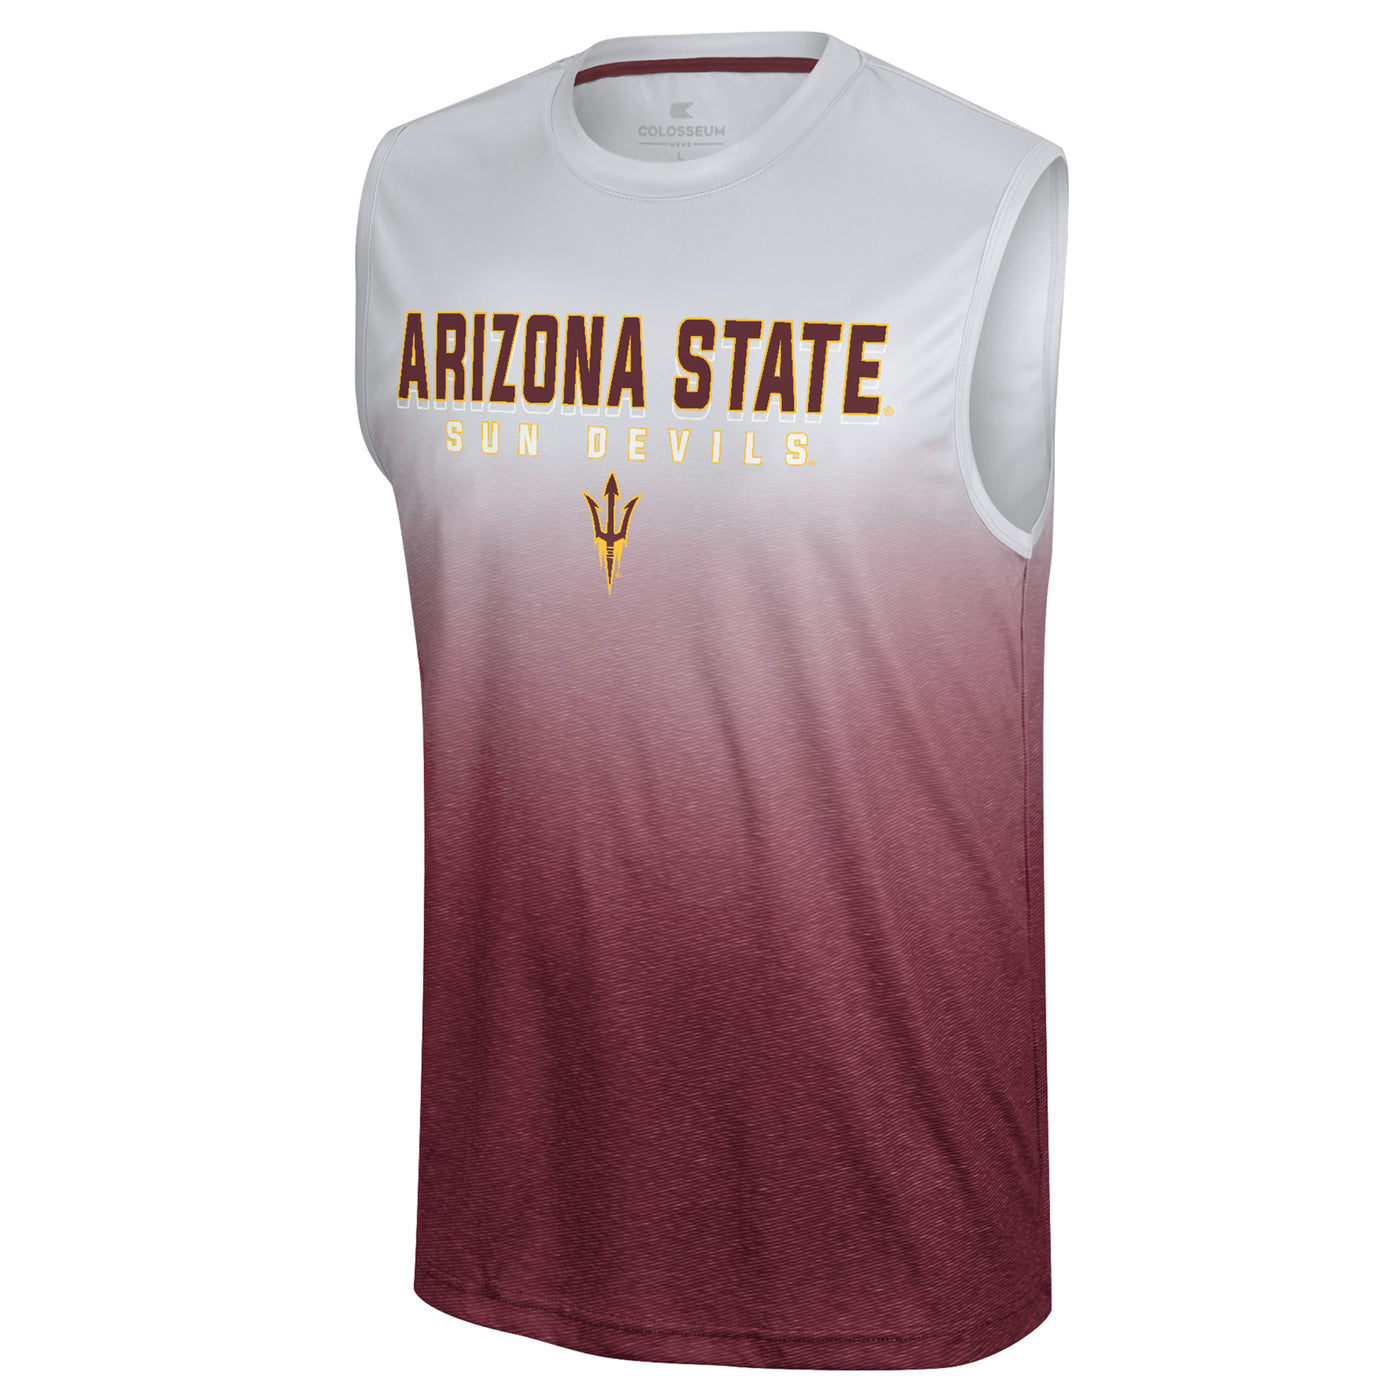 ASU athletic material tank top. Color starts at white at the top and fades into maroon at the bottom. 